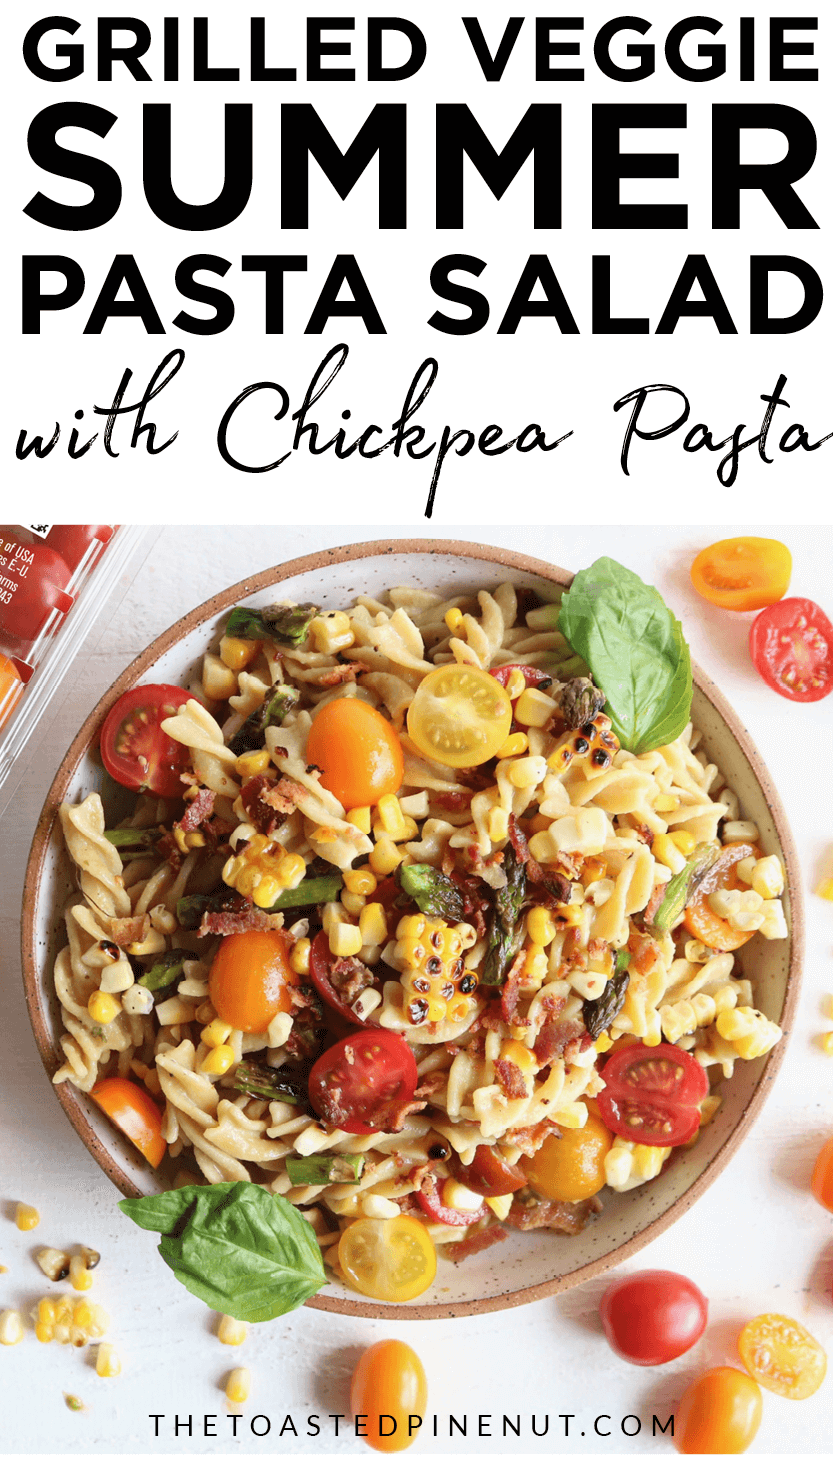 This Grilled Summer Veggie Pasta Salad is the perfect gluten free dish to bring to your next potluck or summer barbecue!! It's packed with flavor and the lemon basil dressing is to die for!! thetoastedpinenut.com #thetoastedpinenut #summer #veggies #grilled #grilling #pastasalad #chickpea #pasta #dairyfree